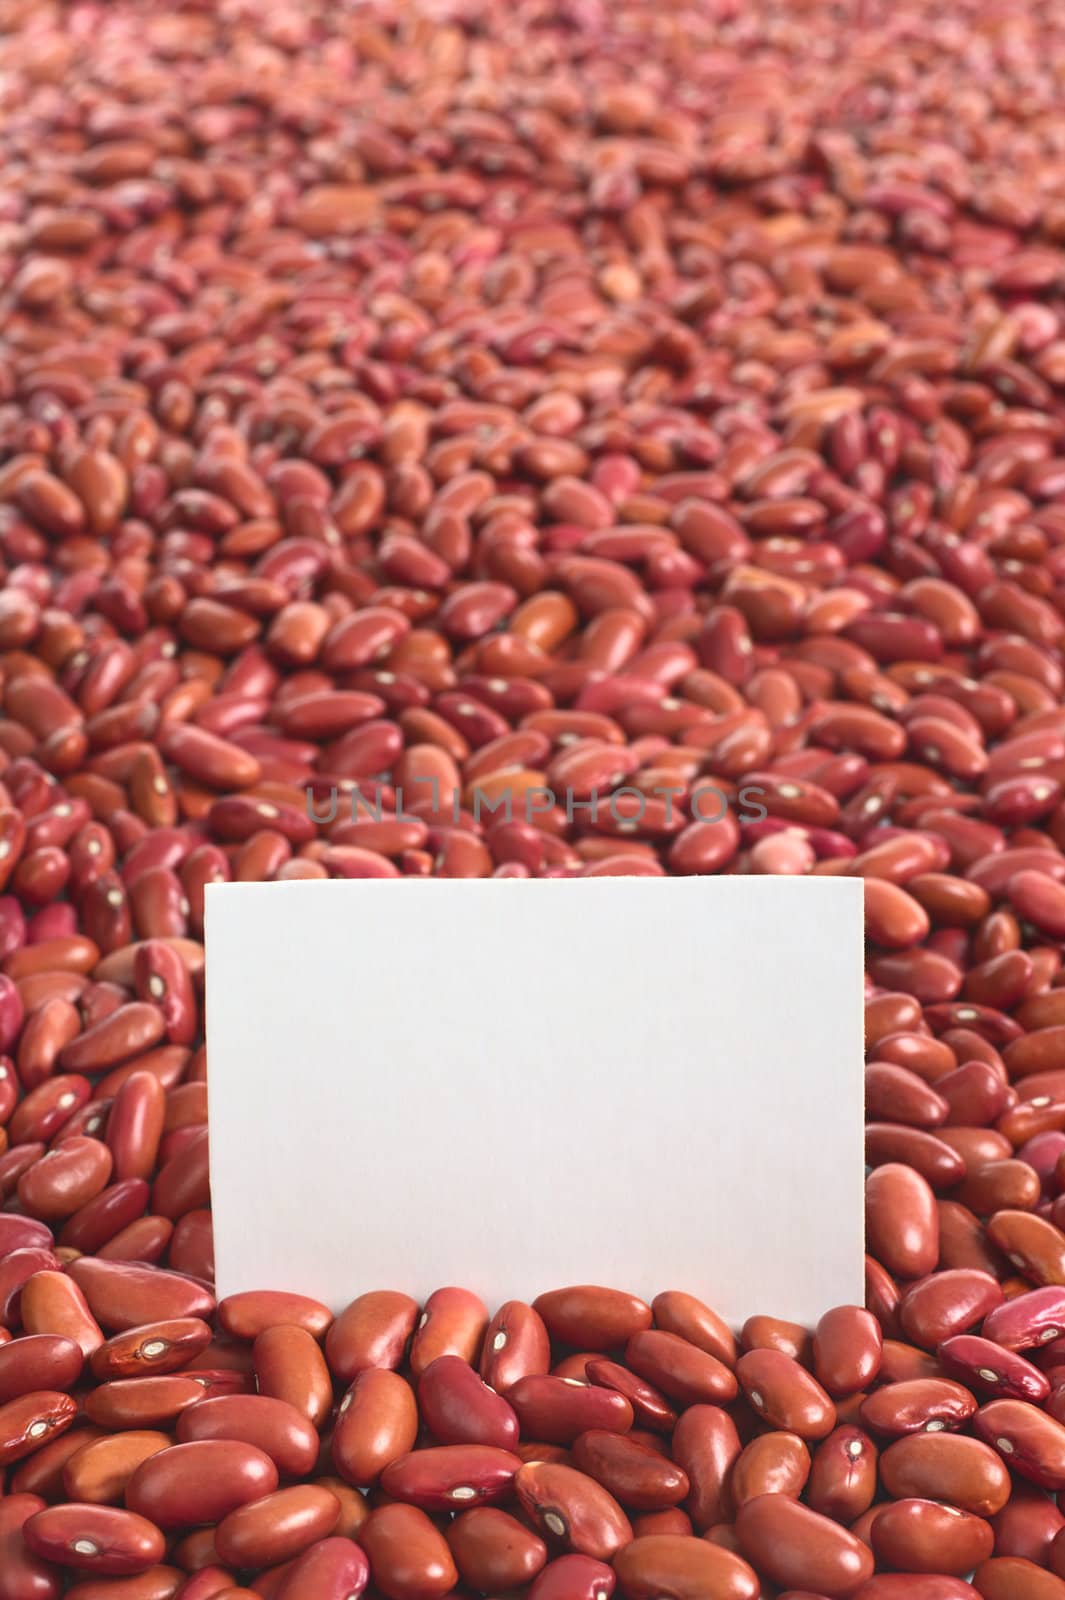 Raw Red Kidney Beans with Blank Card  by ildi